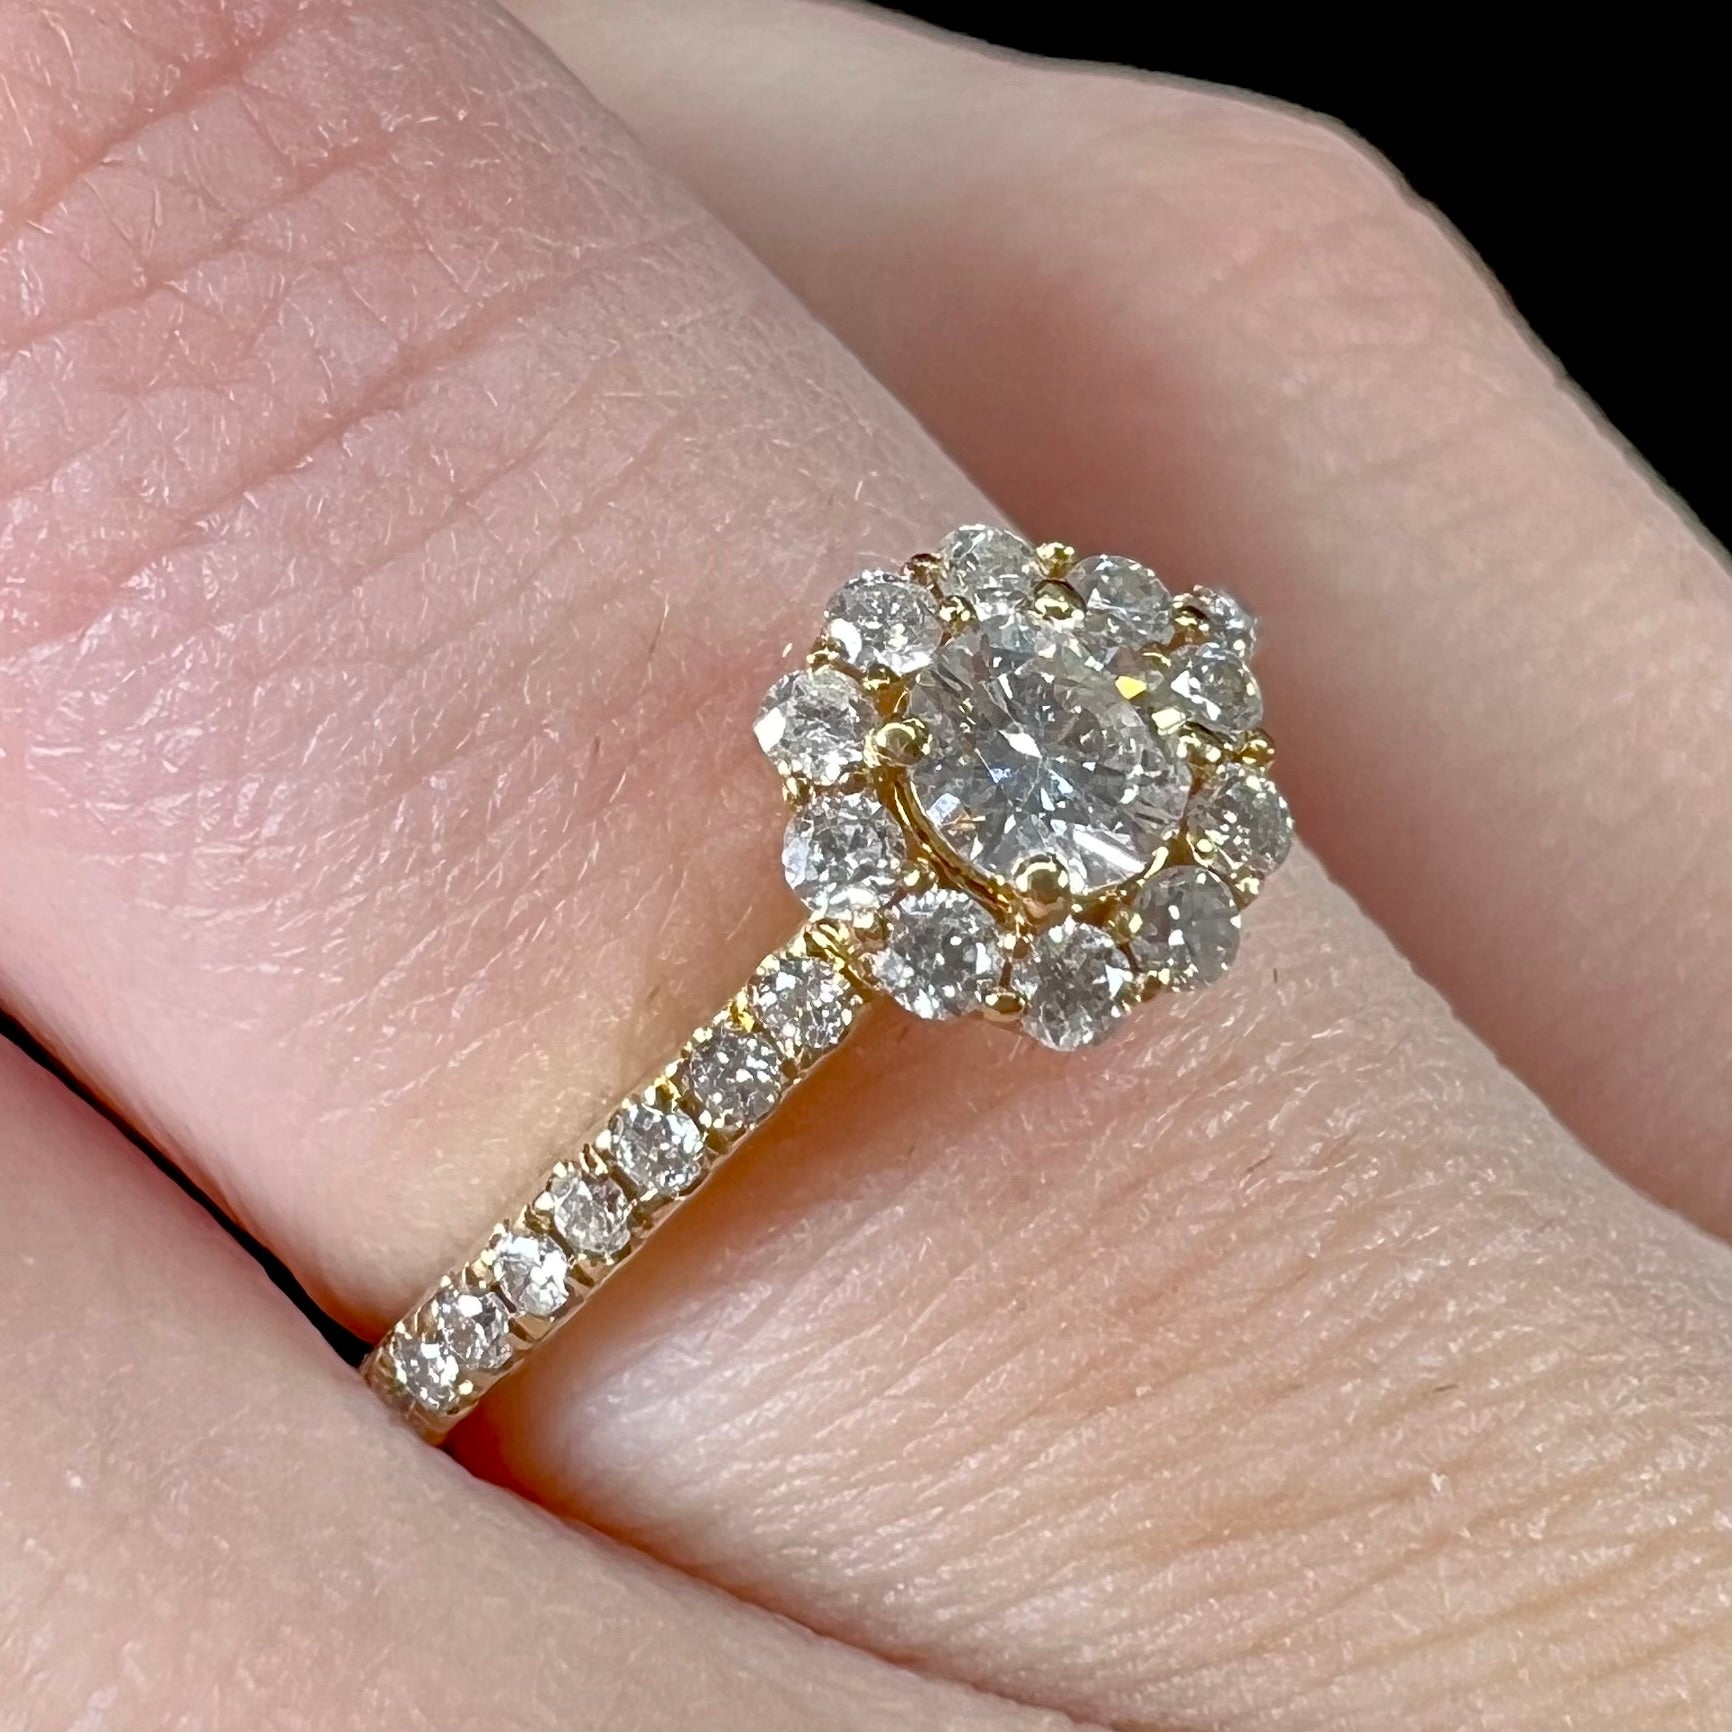 A ladies' diamond halo engagement ring cast in yellow gold.  The center stone is a 0.19ct round cut natural diamond.